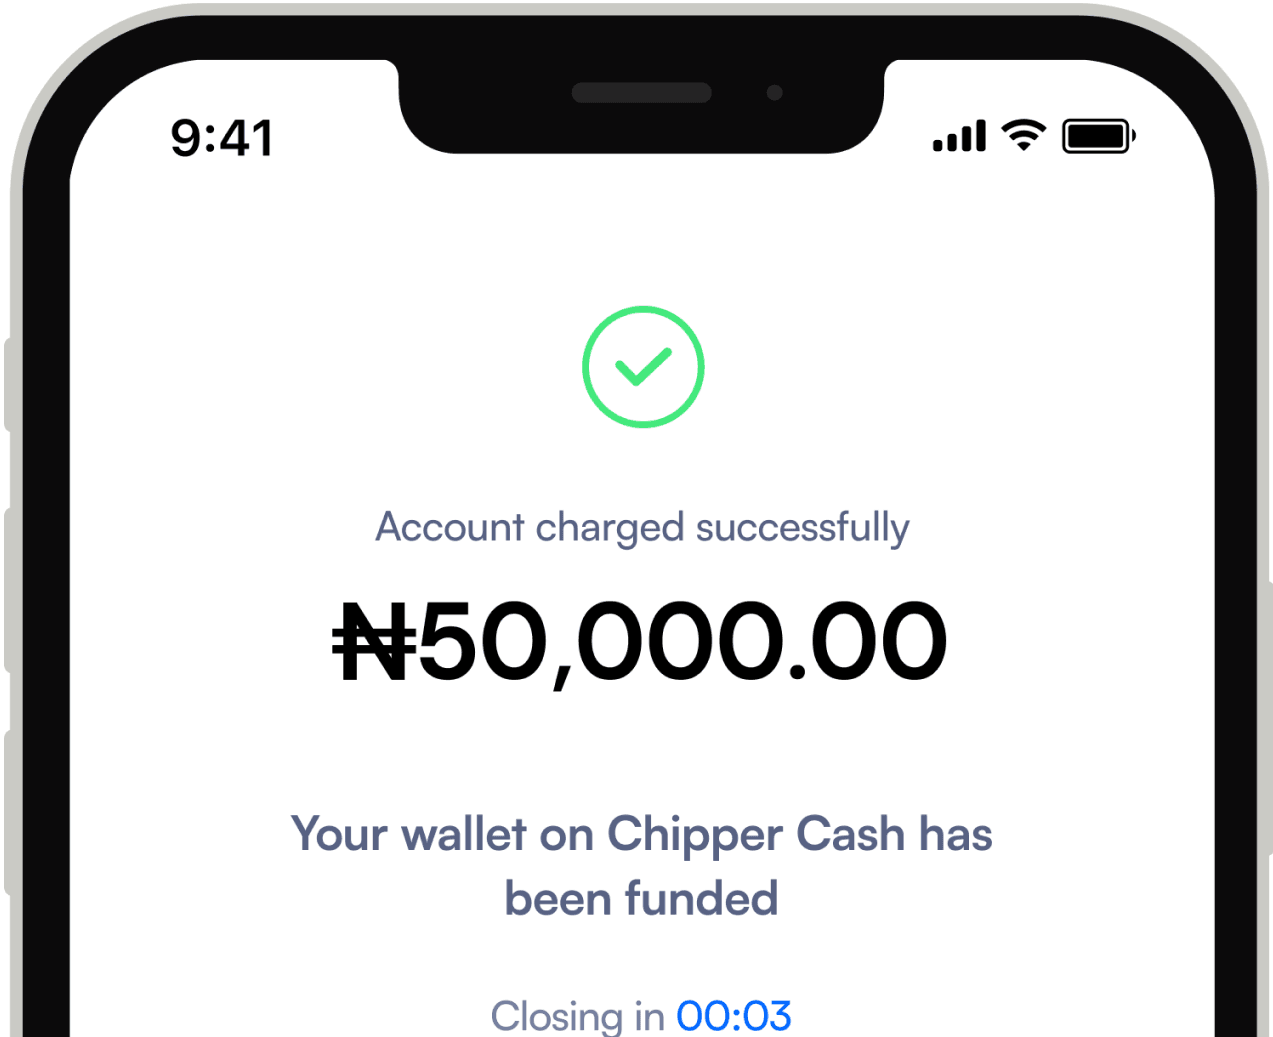 An image of a payment successful screen displaying the wallet name, transaction details such as the amount to be received, from, transaction charge, and the total